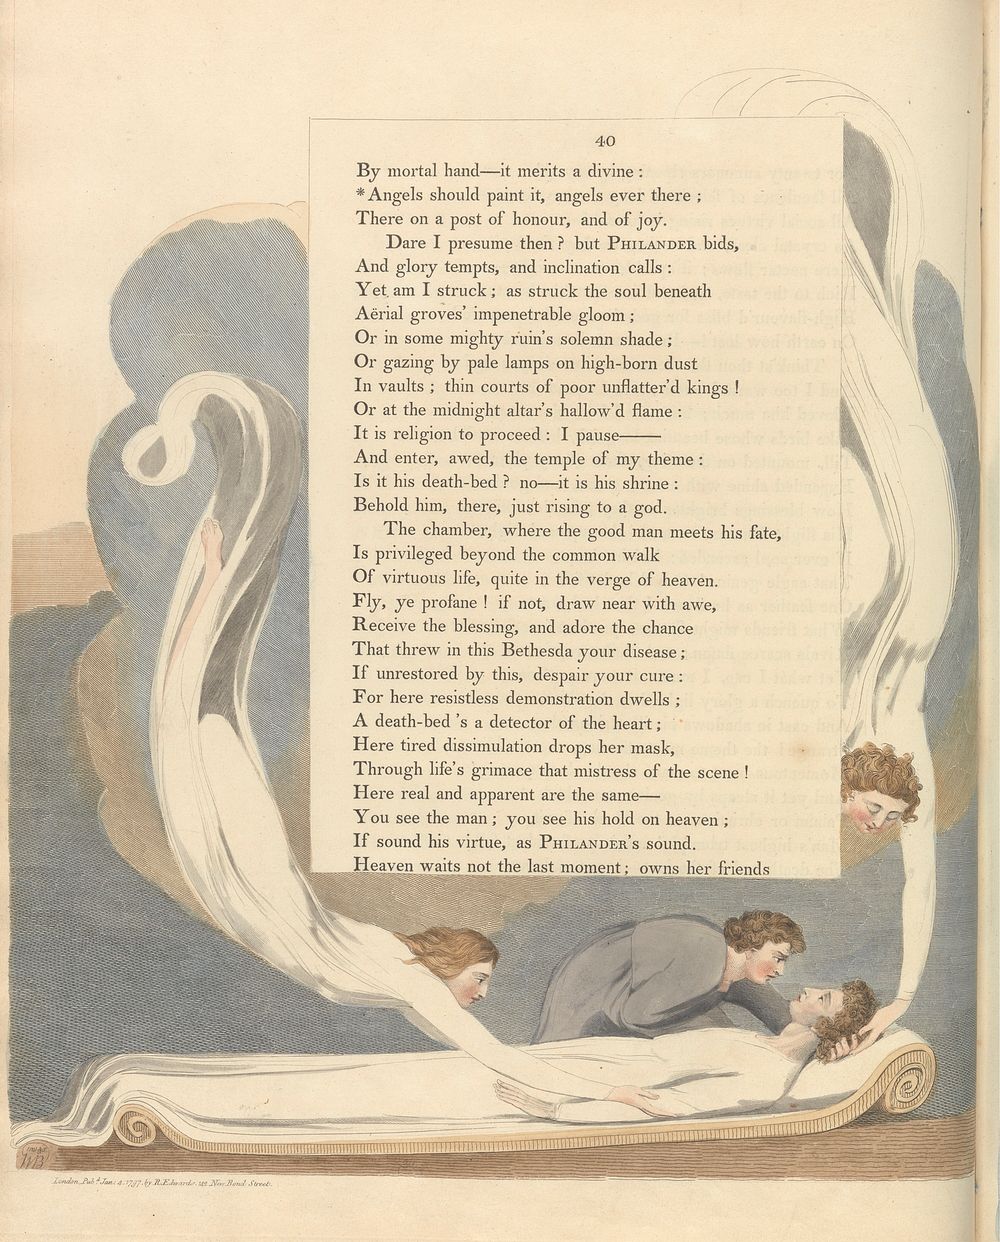 Young's Night Thoughts, Page 40, "Angels should paint it, angels ever there" by William Blake.